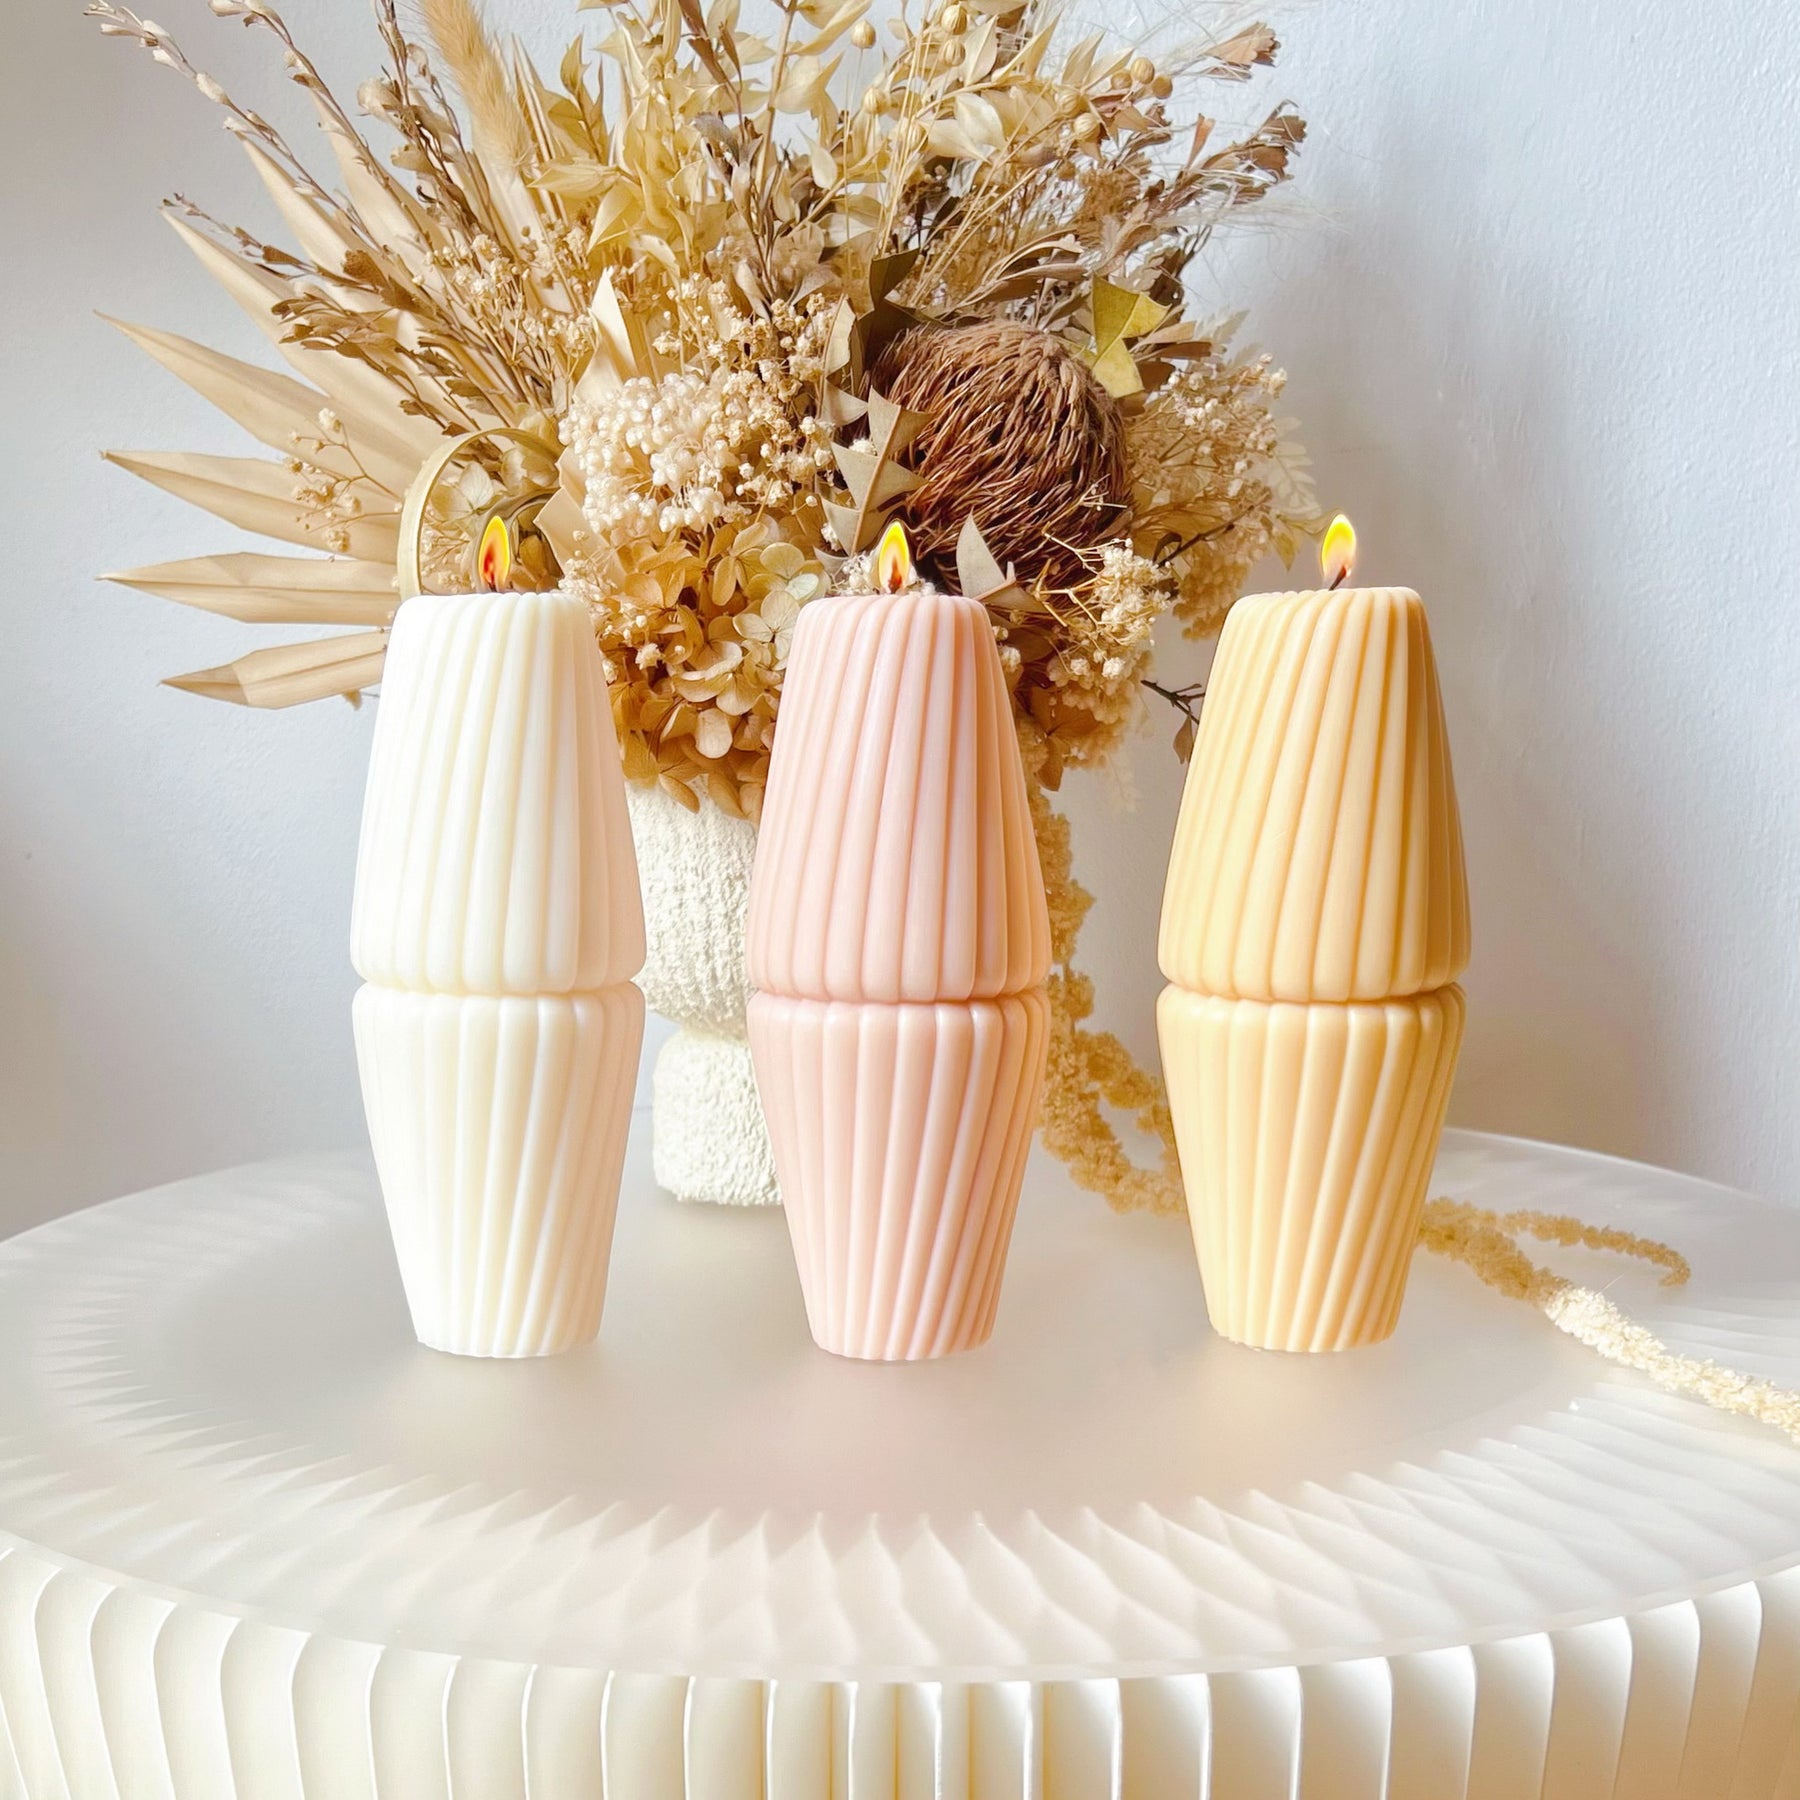 Minimalistic Ribbed Swirl Scented Soy Pillar Candle - LMJ Candles